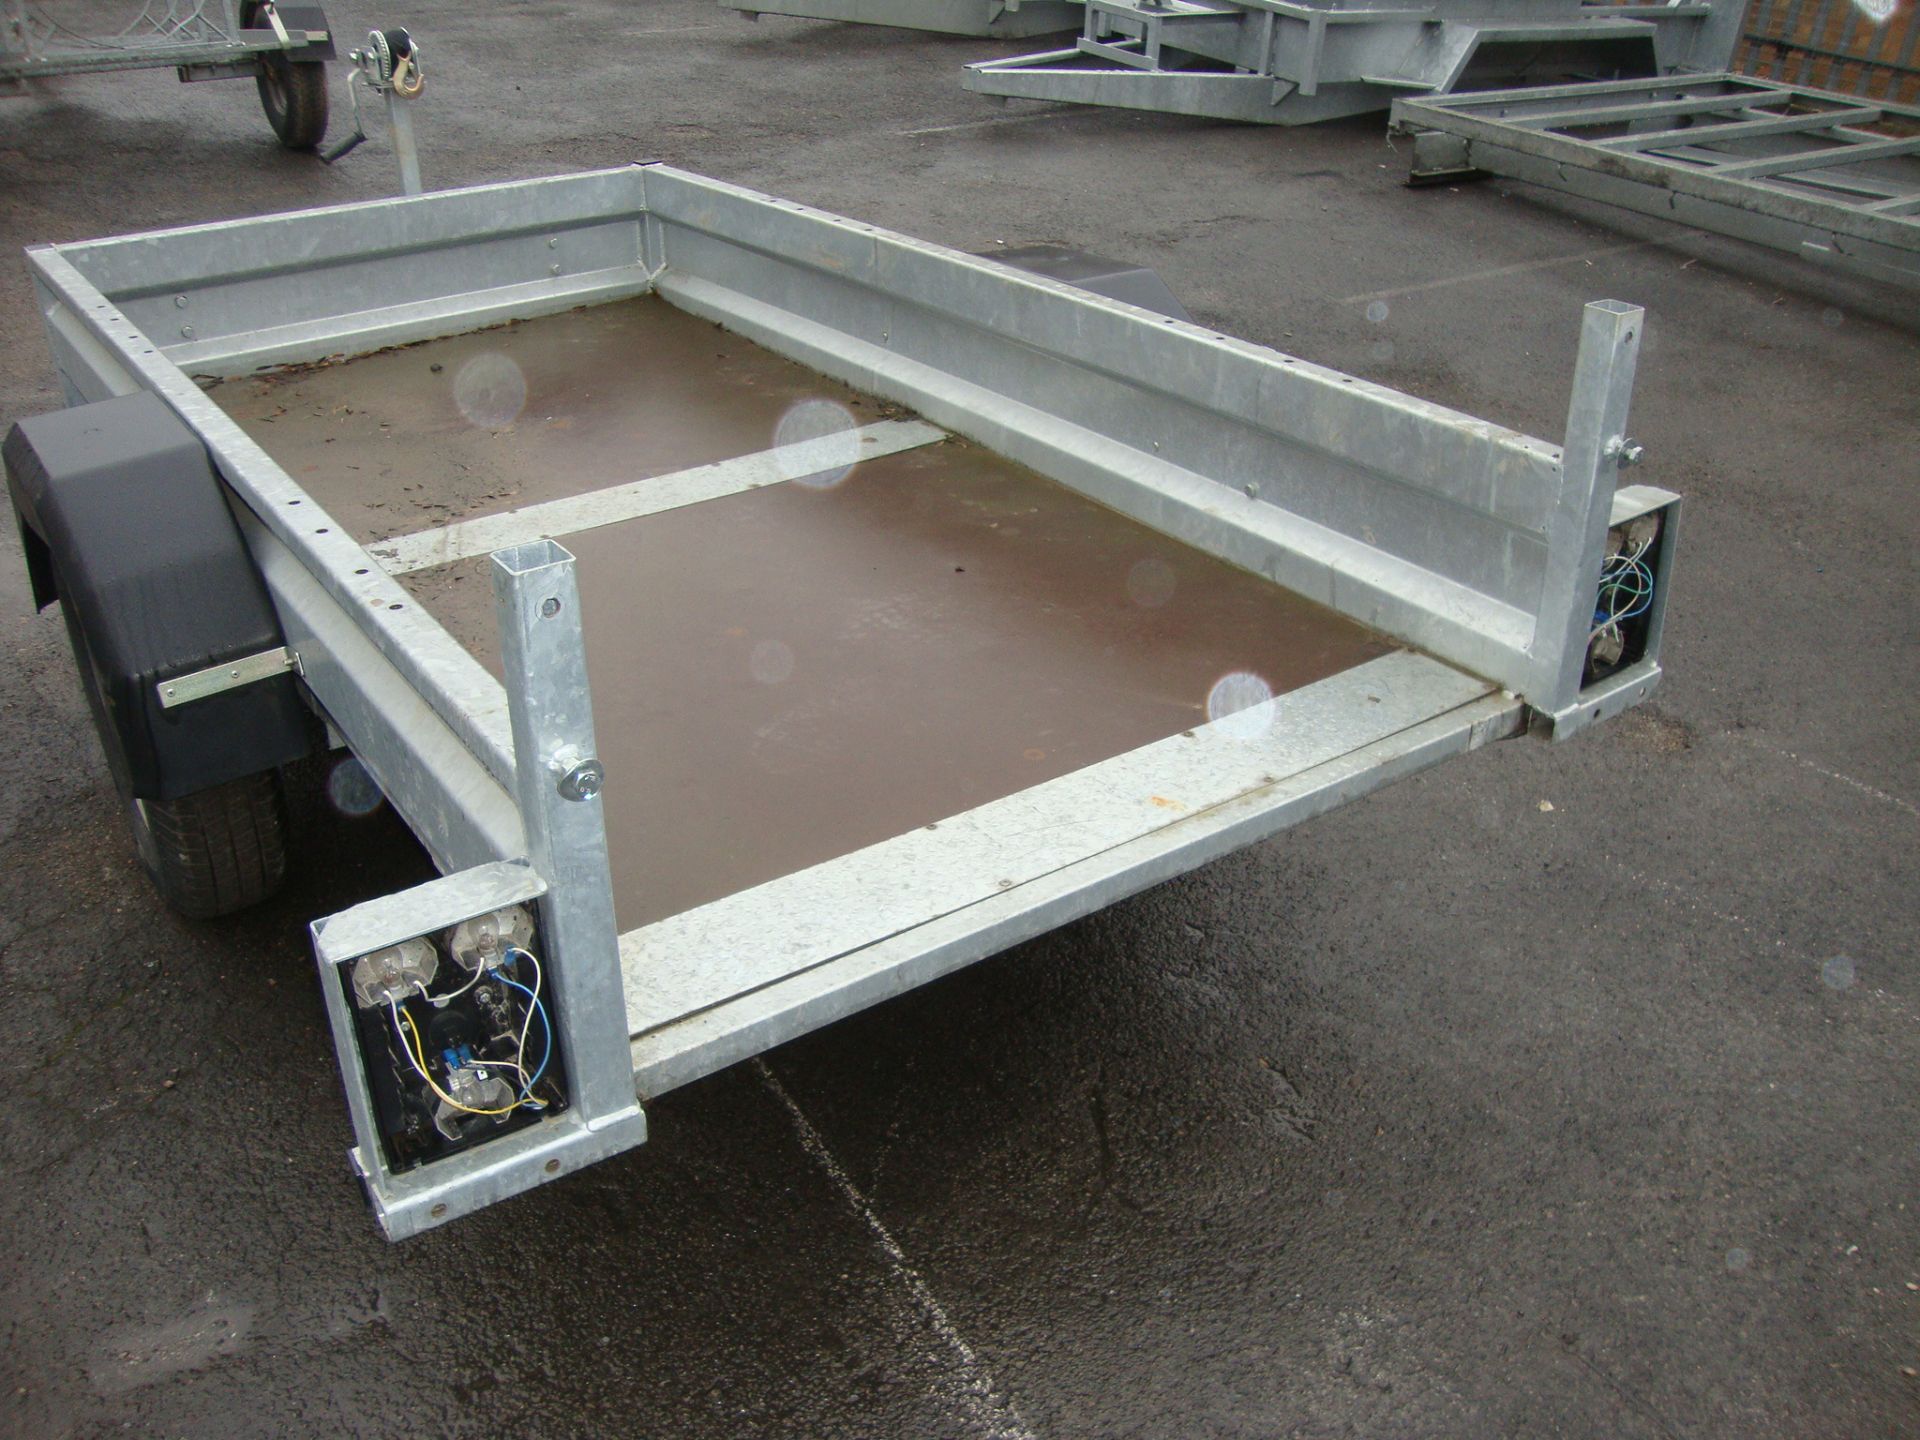 Single axle trailer with open rear (suitable for attaching a small drop down panel or a large ramp), - Image 5 of 7